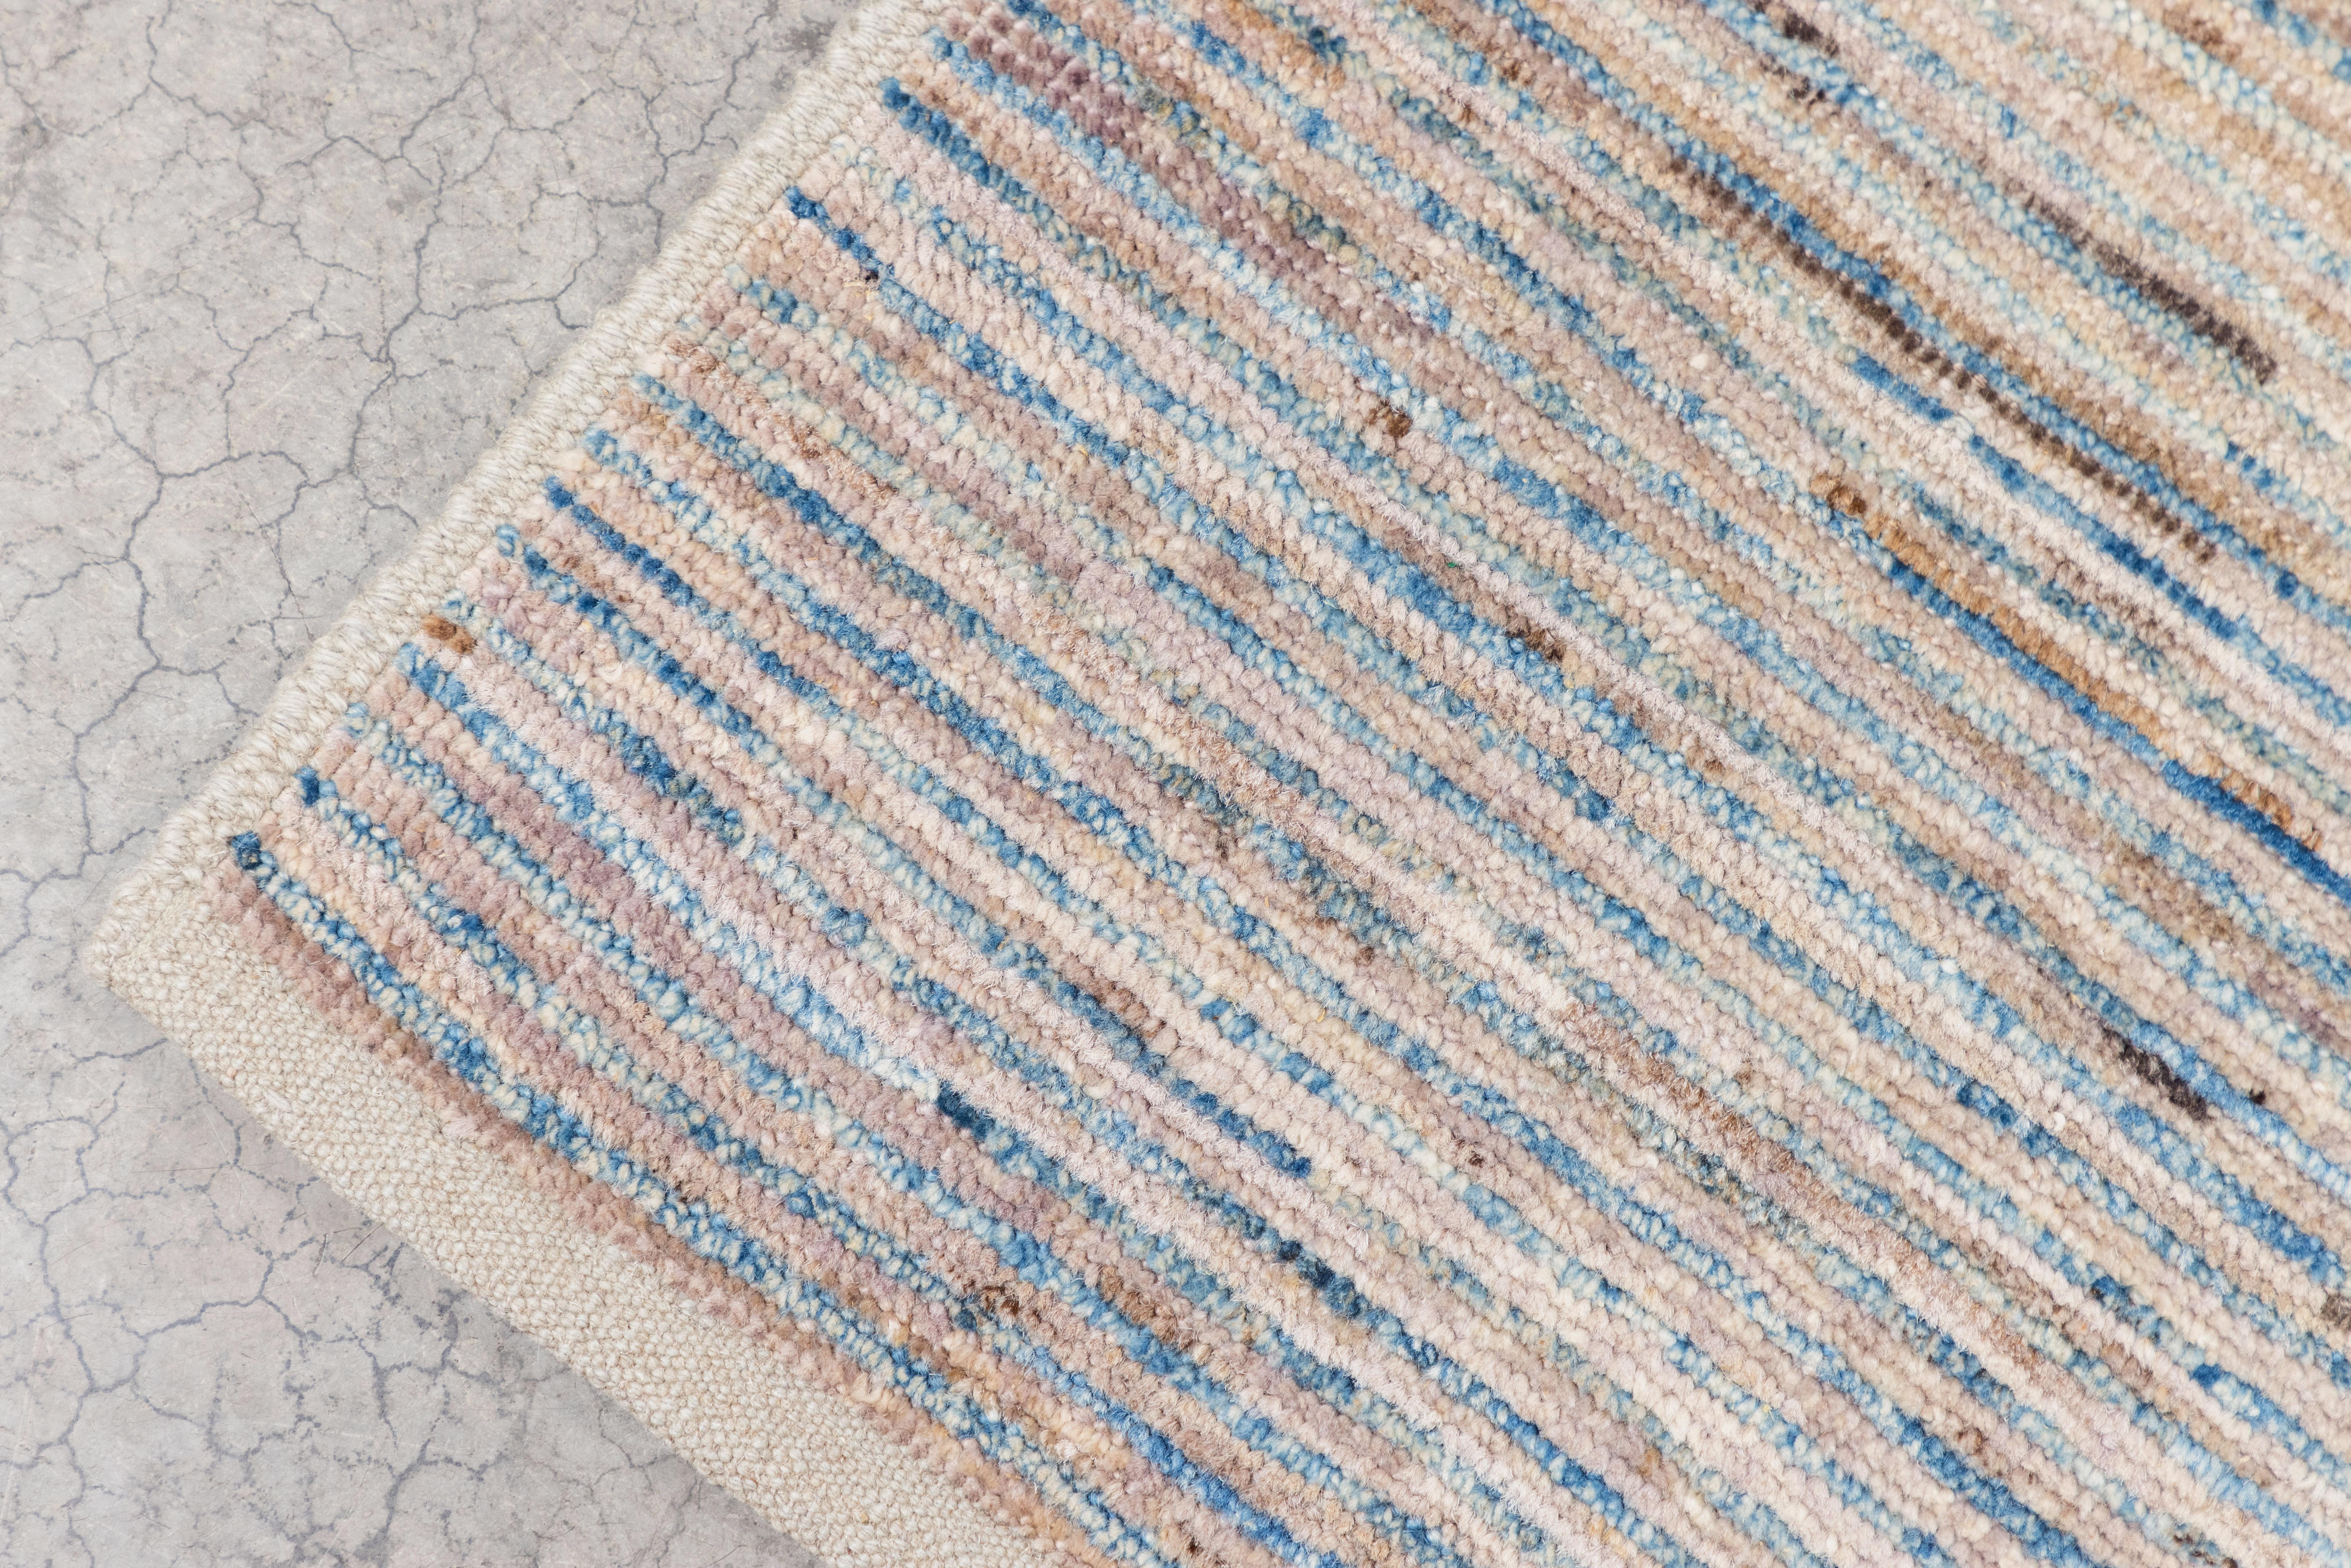 This stunning modern Afghan hand knotted wool rug is made up of an array of subtle blue, gray, beige and cream stripes. It is a beautiful base addition to any room. Measures: 3.5' x 4.8'.